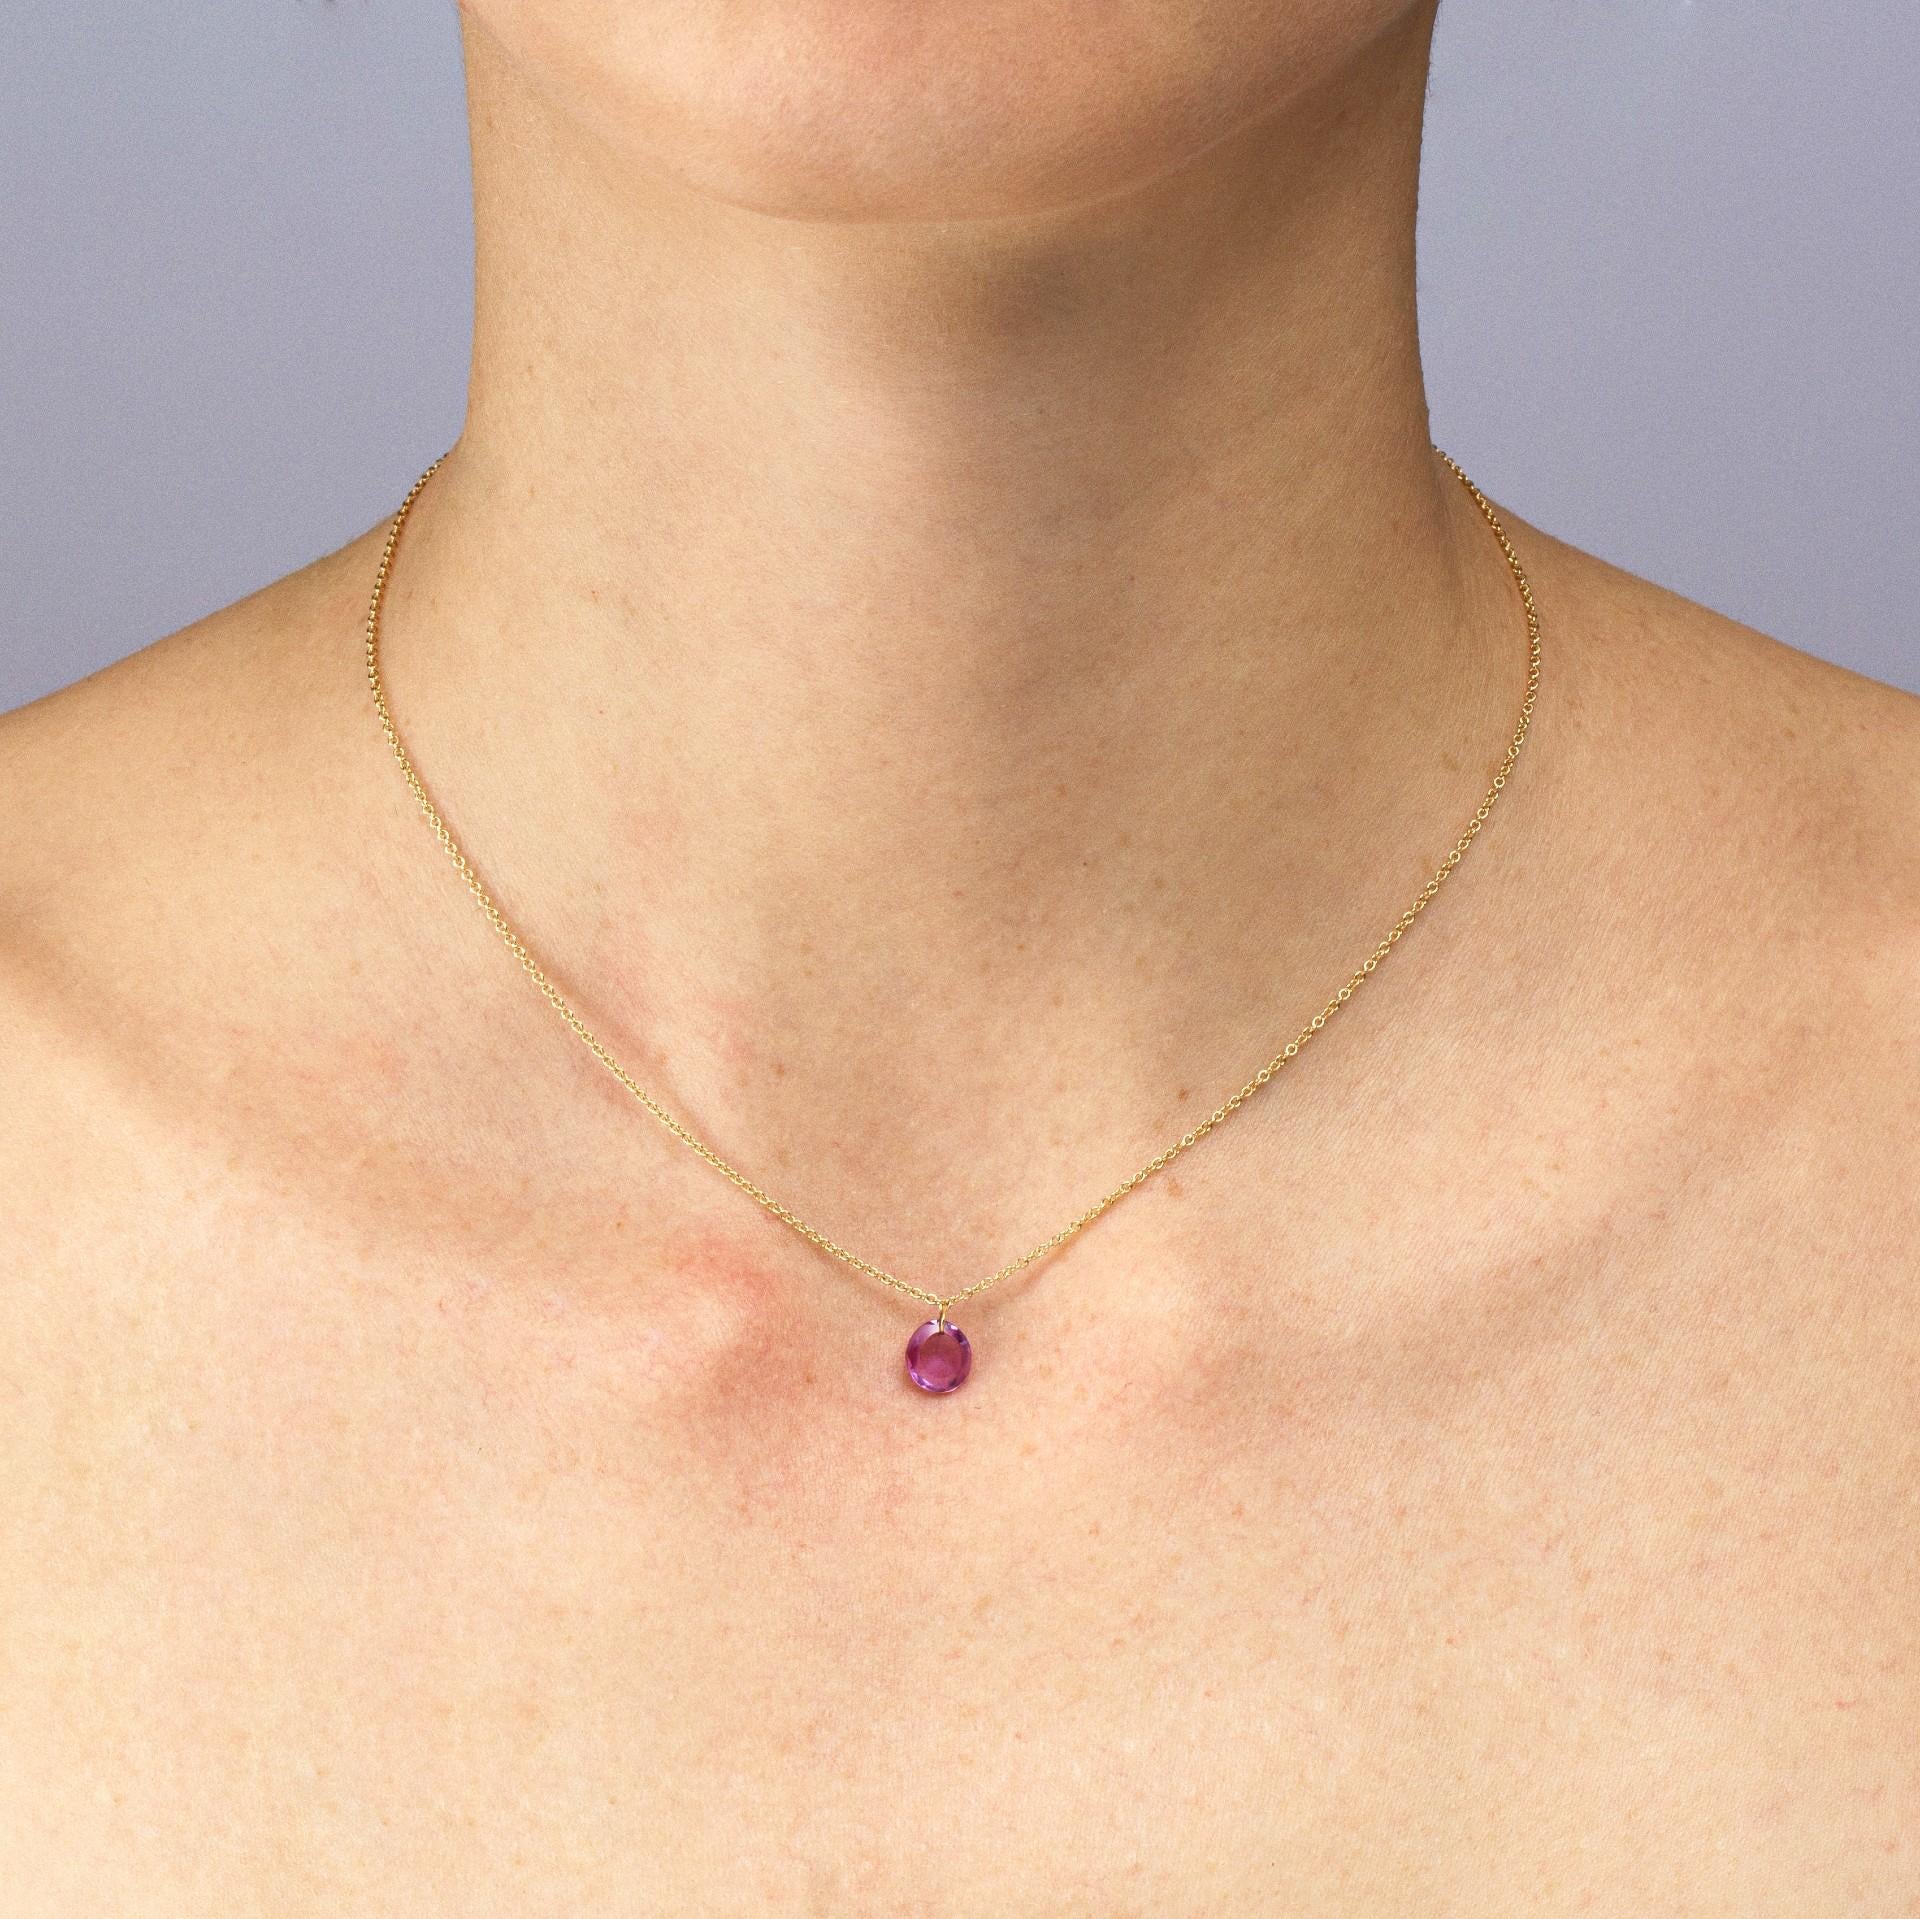 Alex Jona design collection, hand crafted in Italy, 18 Karat yellow gold chain necklace featuring a flat cut pink sapphire weighing 1.26 ct.
Dimensions: L x 18.11 in / L x 45cm.

Alex Jona jewels stand out, not only for their special design and for